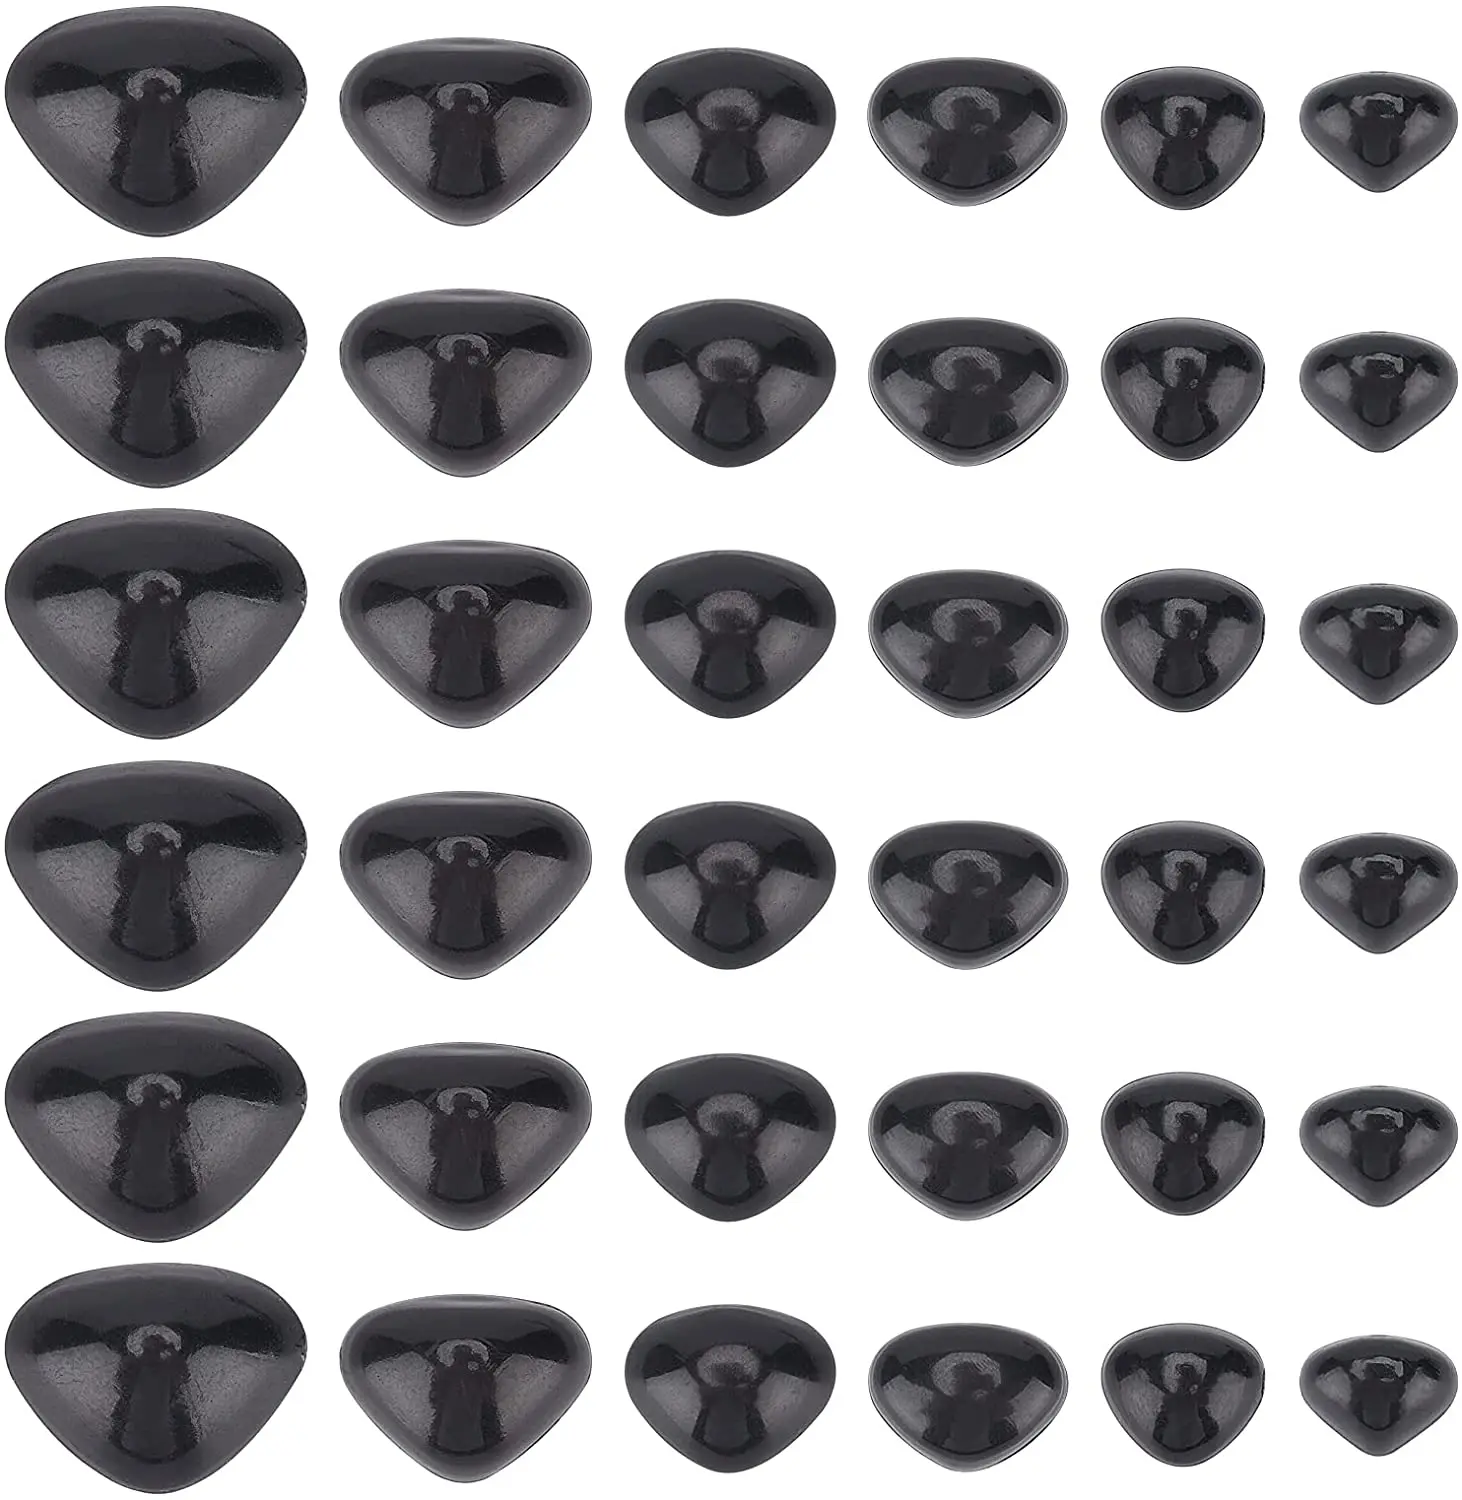 

294 black plastic safety triangle nose dolls with washing machine nose and various sizes plush animal teddy bear craft